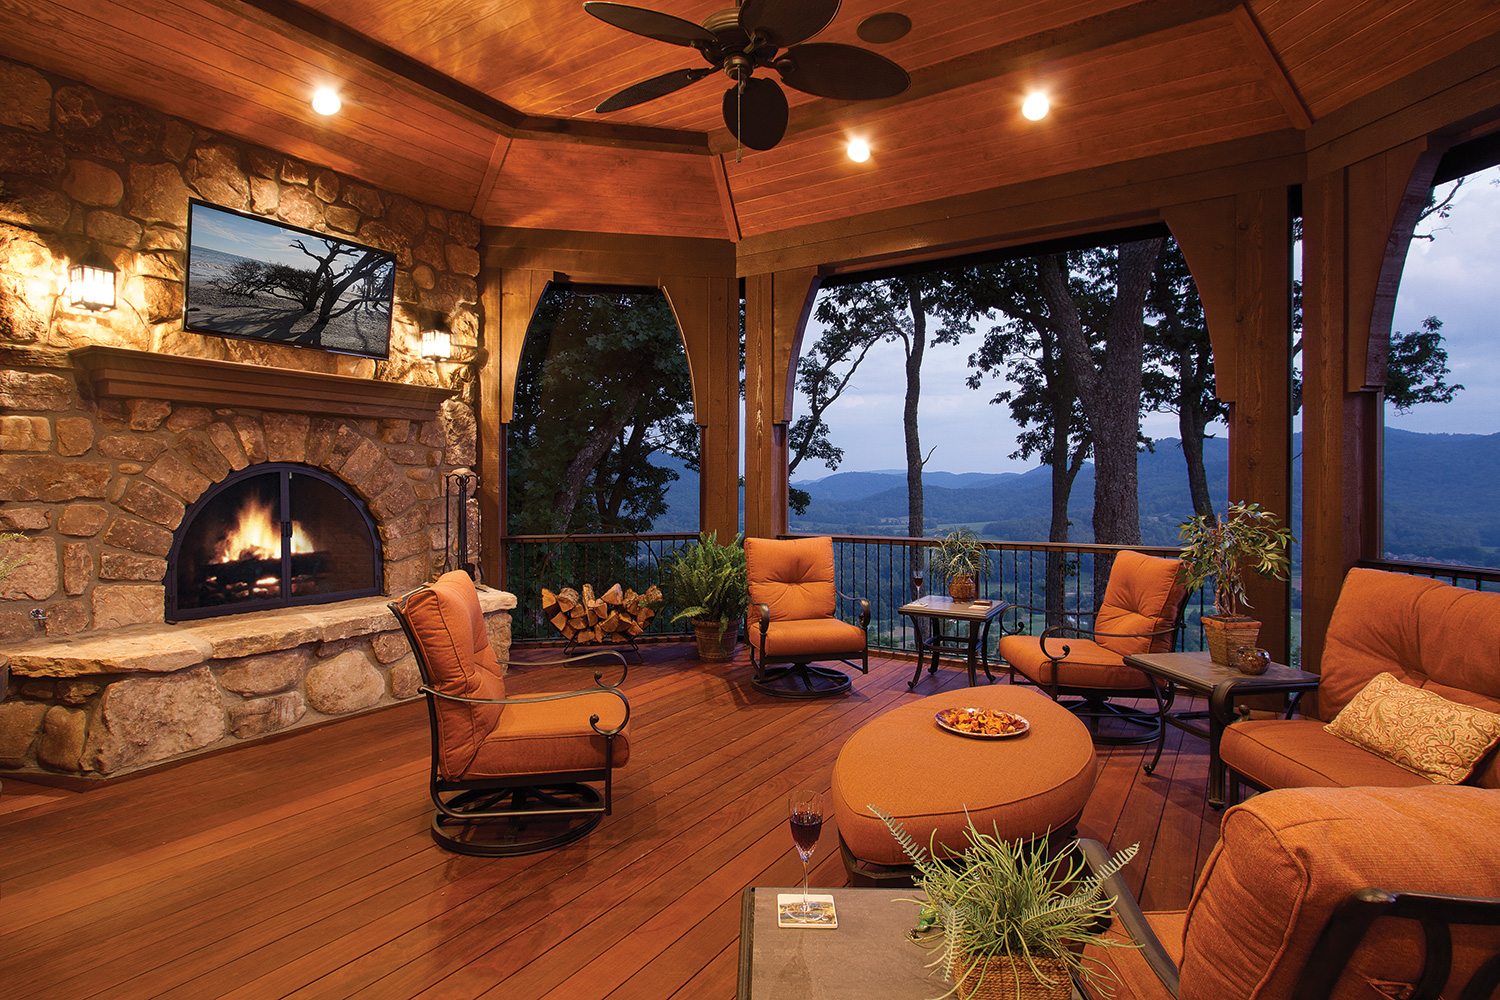 Several overlooks from the back of the house are designed for more than a passing moment. The screened-in porch is a favorite. Curved brackets frame an expansive view of the surrounding mountainous terrain. Folding doors open to the kitchen, doubling the size for entertaining. Ipe, a lush hardwood known for its durability, completes the decking and an exterior fireplace adds ambiance. Photo by J. Weiland